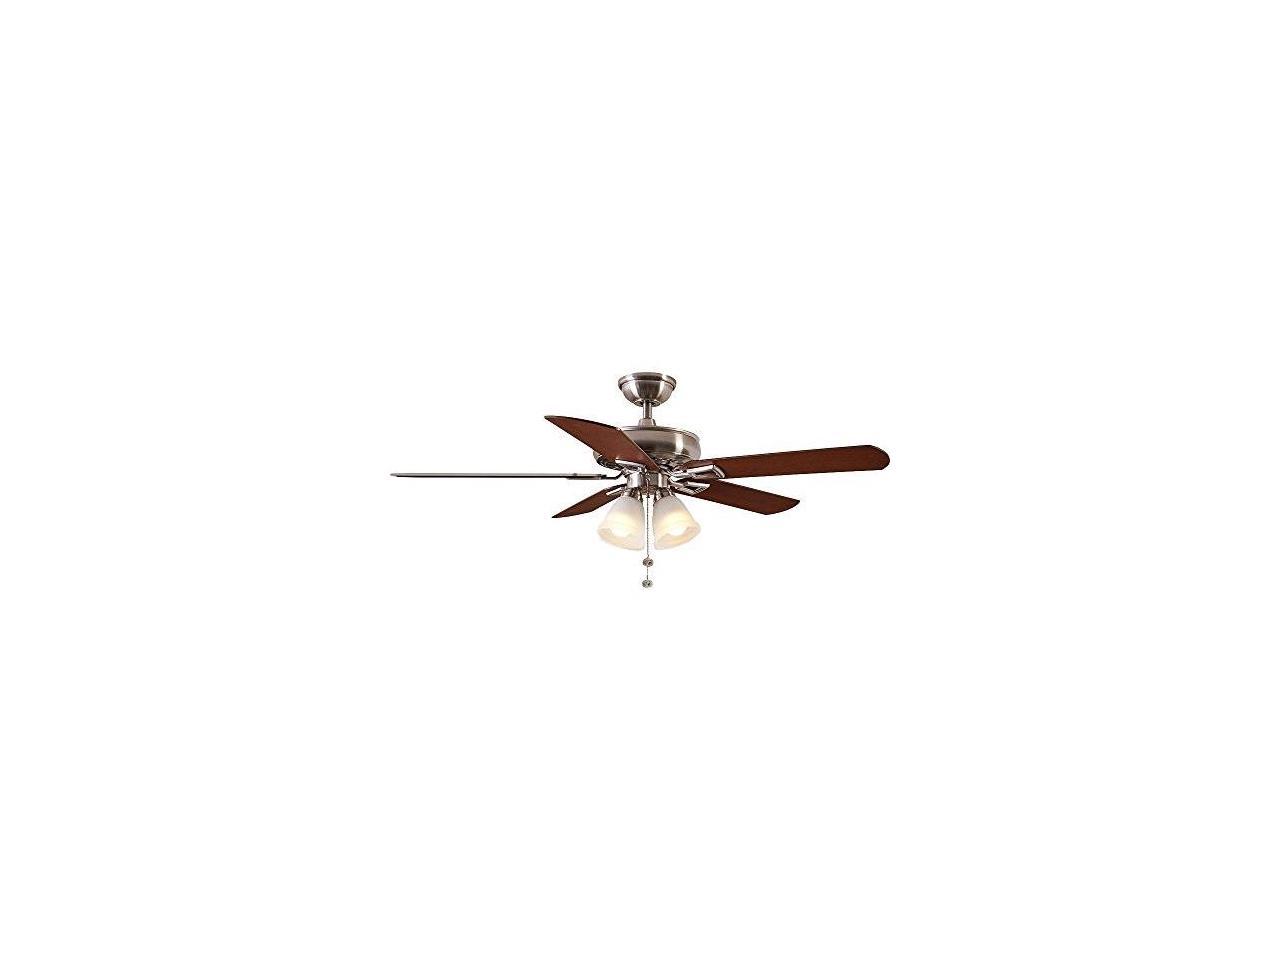 Indoor Brushed Nickel Ceiling Fan with Light Kit Hampton Bay Carrolton 52 in